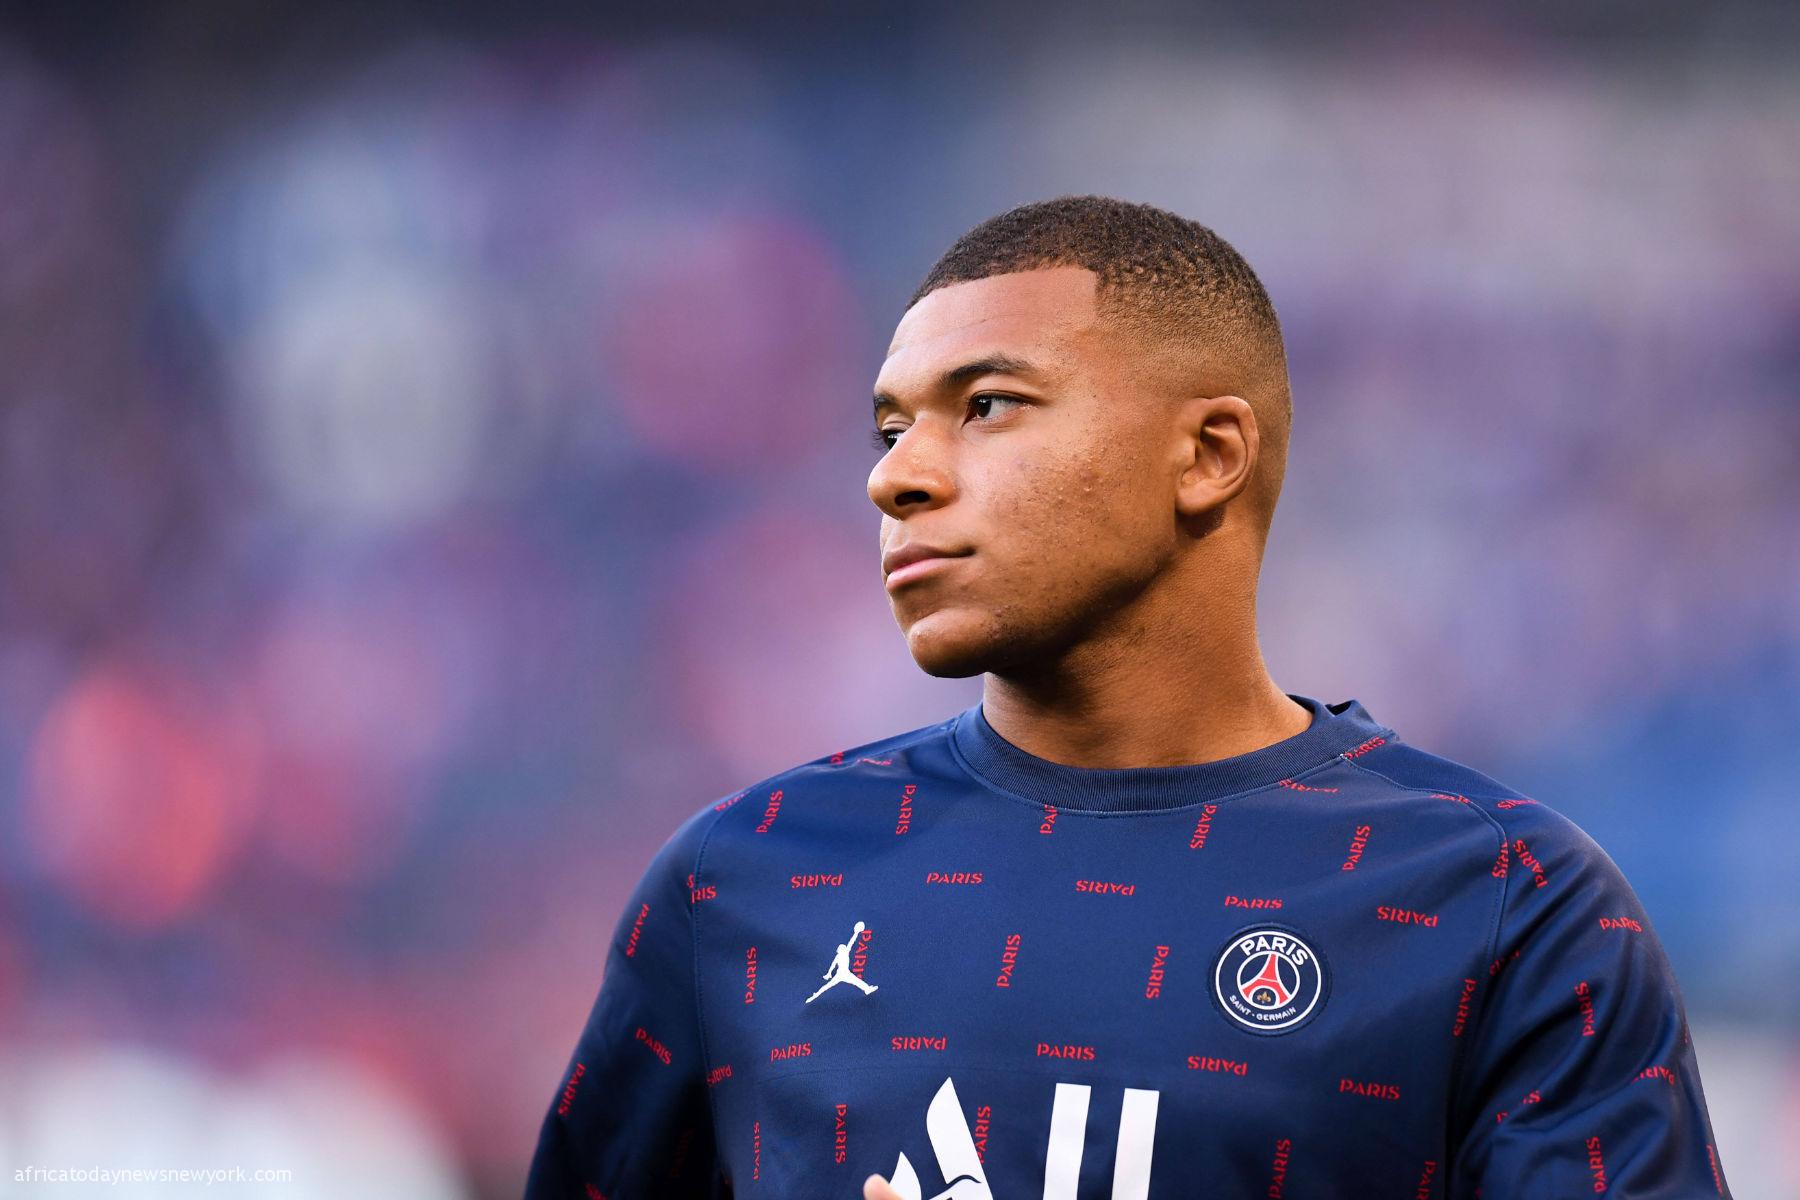 LaLiga To Drag PSG To UEFA Over Mbappe's Contract